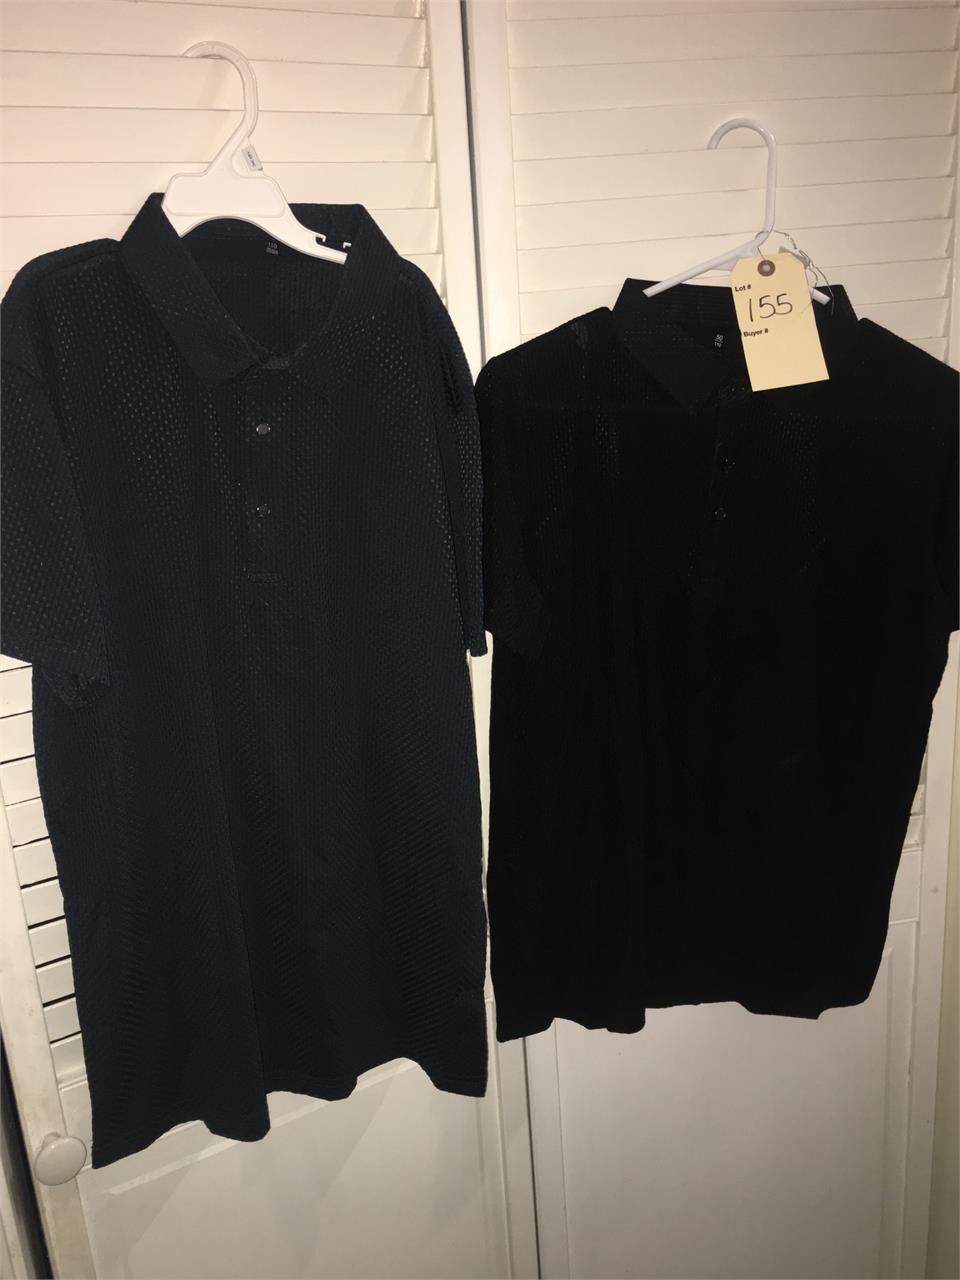 2 CUTOMIX POLO SHIRTS NEW IN PACKAGE ORIG $80 EACH